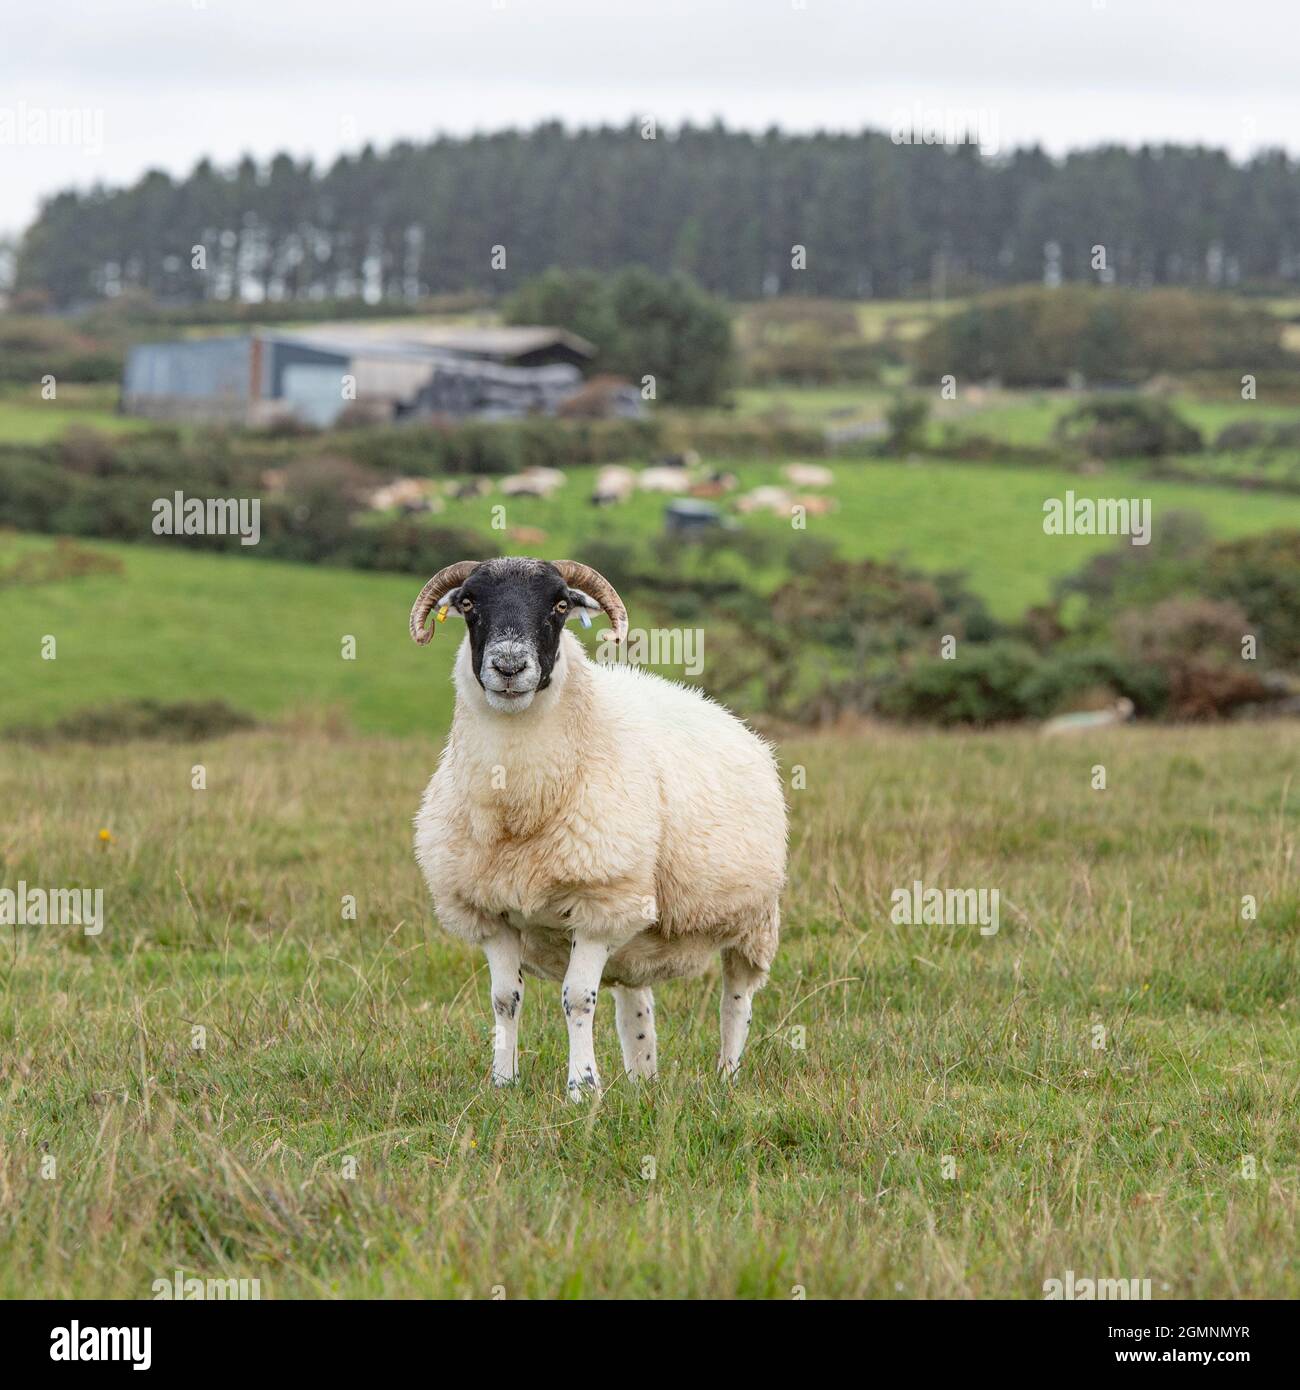 sheep in a field looking at camera Stock Photo